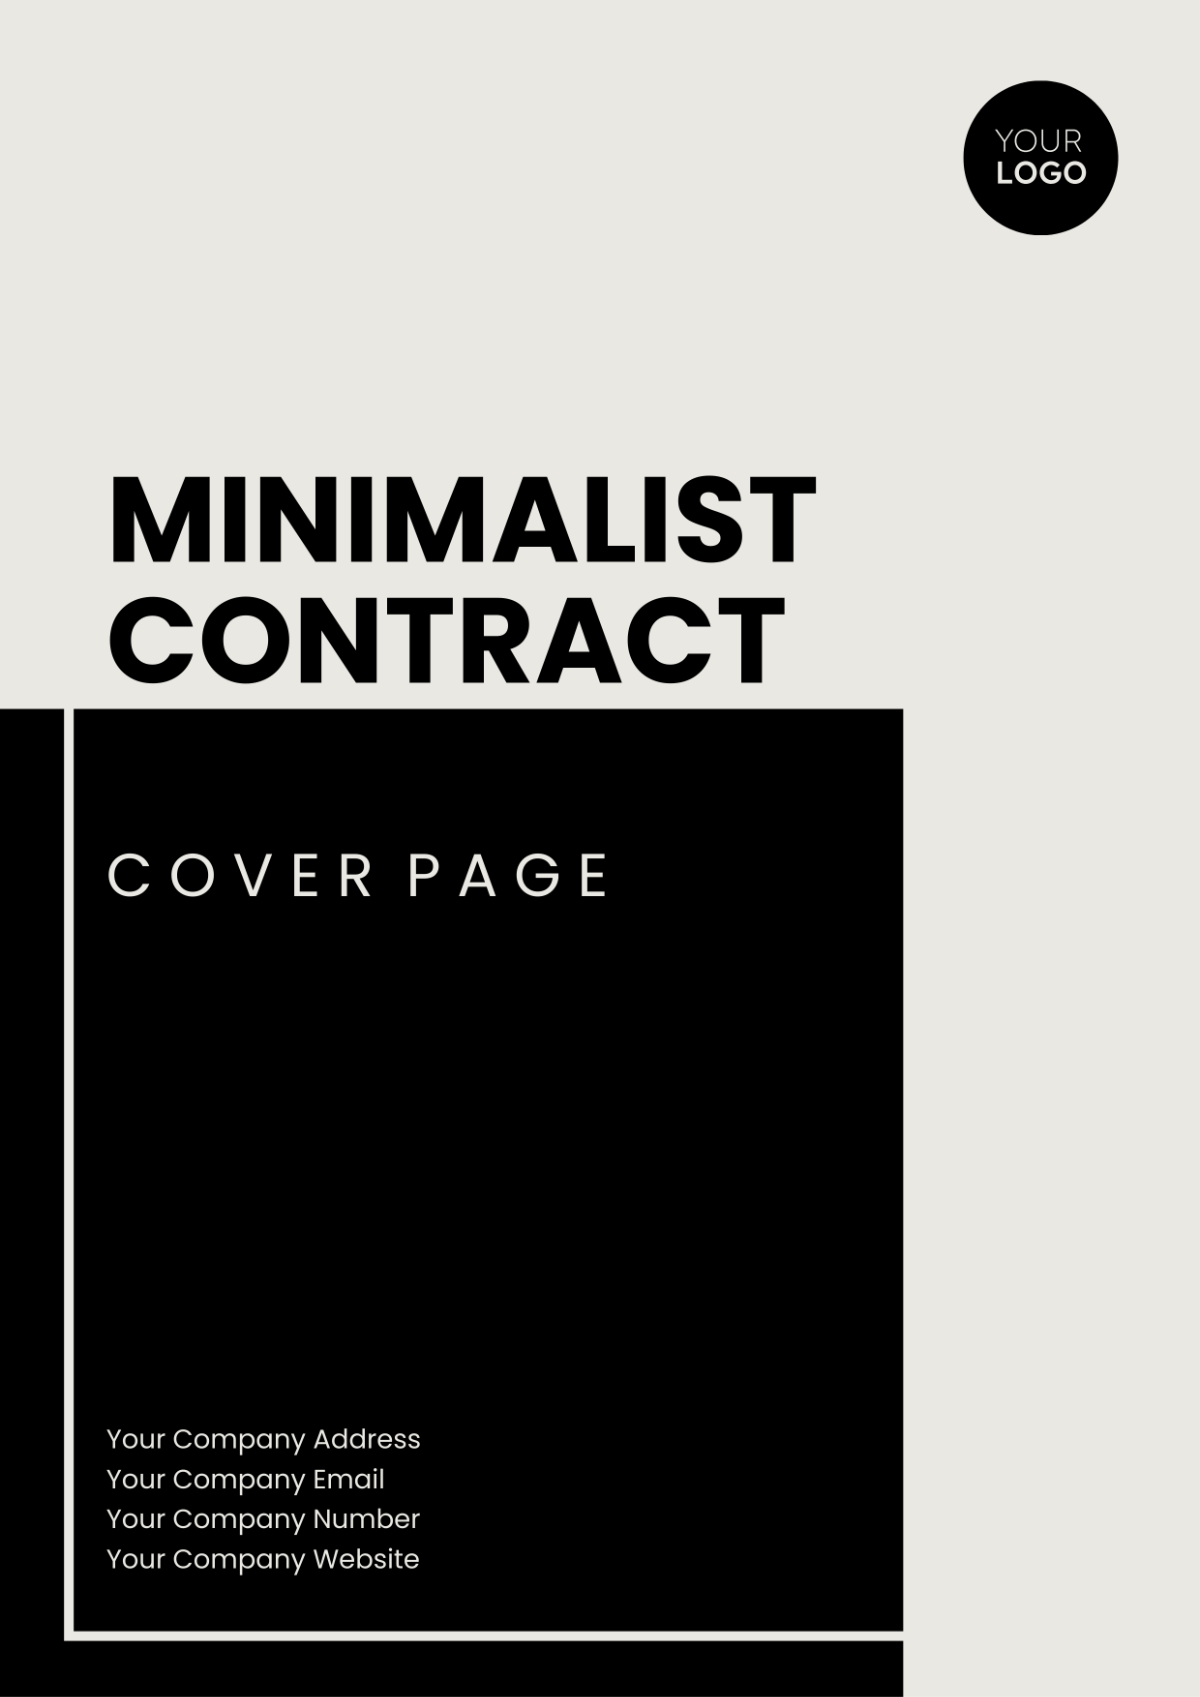 Minimalist Contract Cover Page